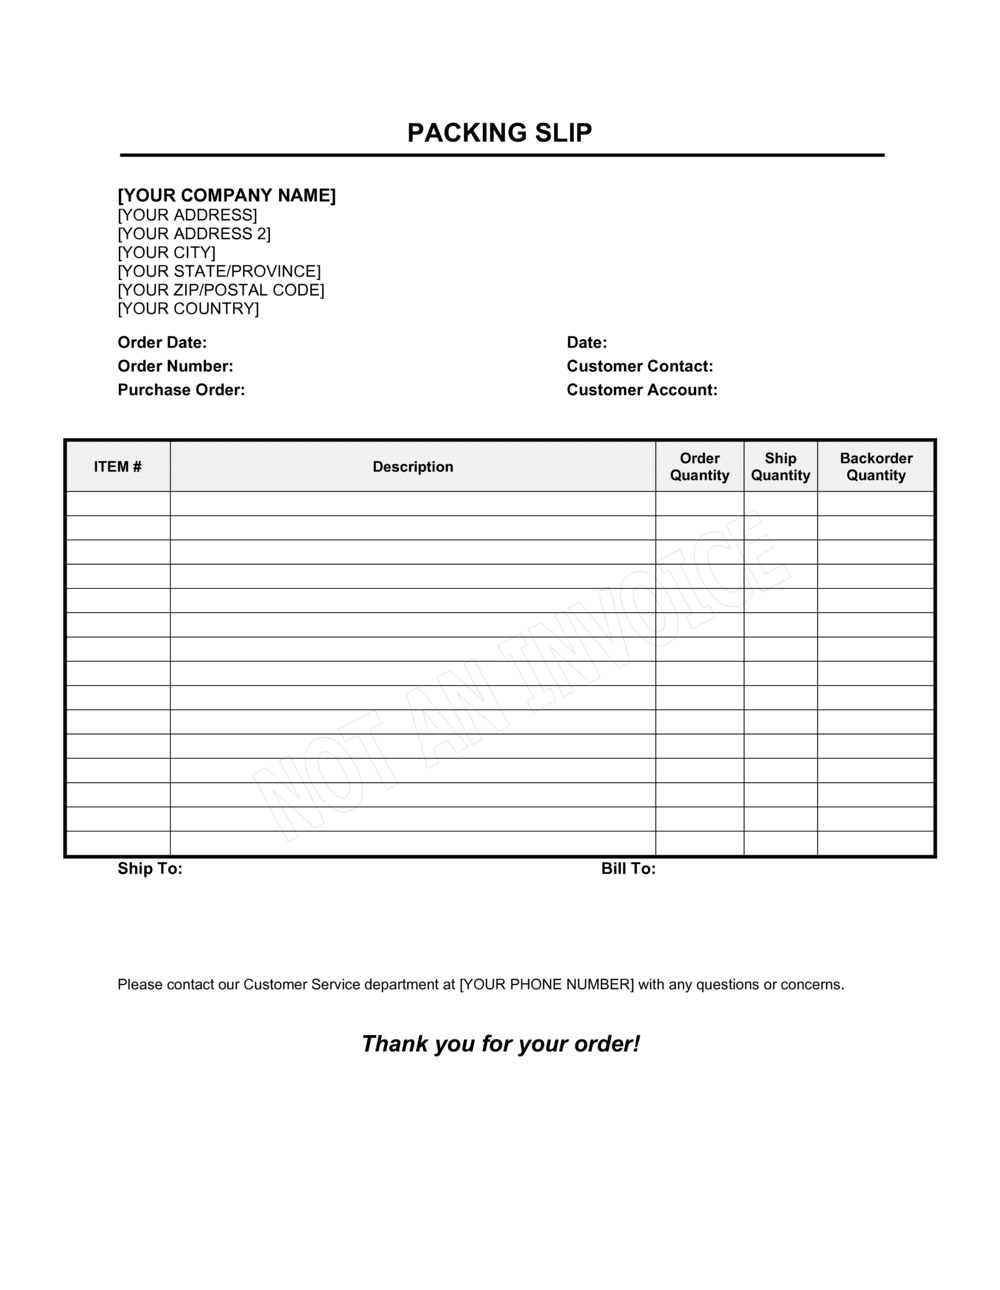 Packing Slip Template By Business in a Box 